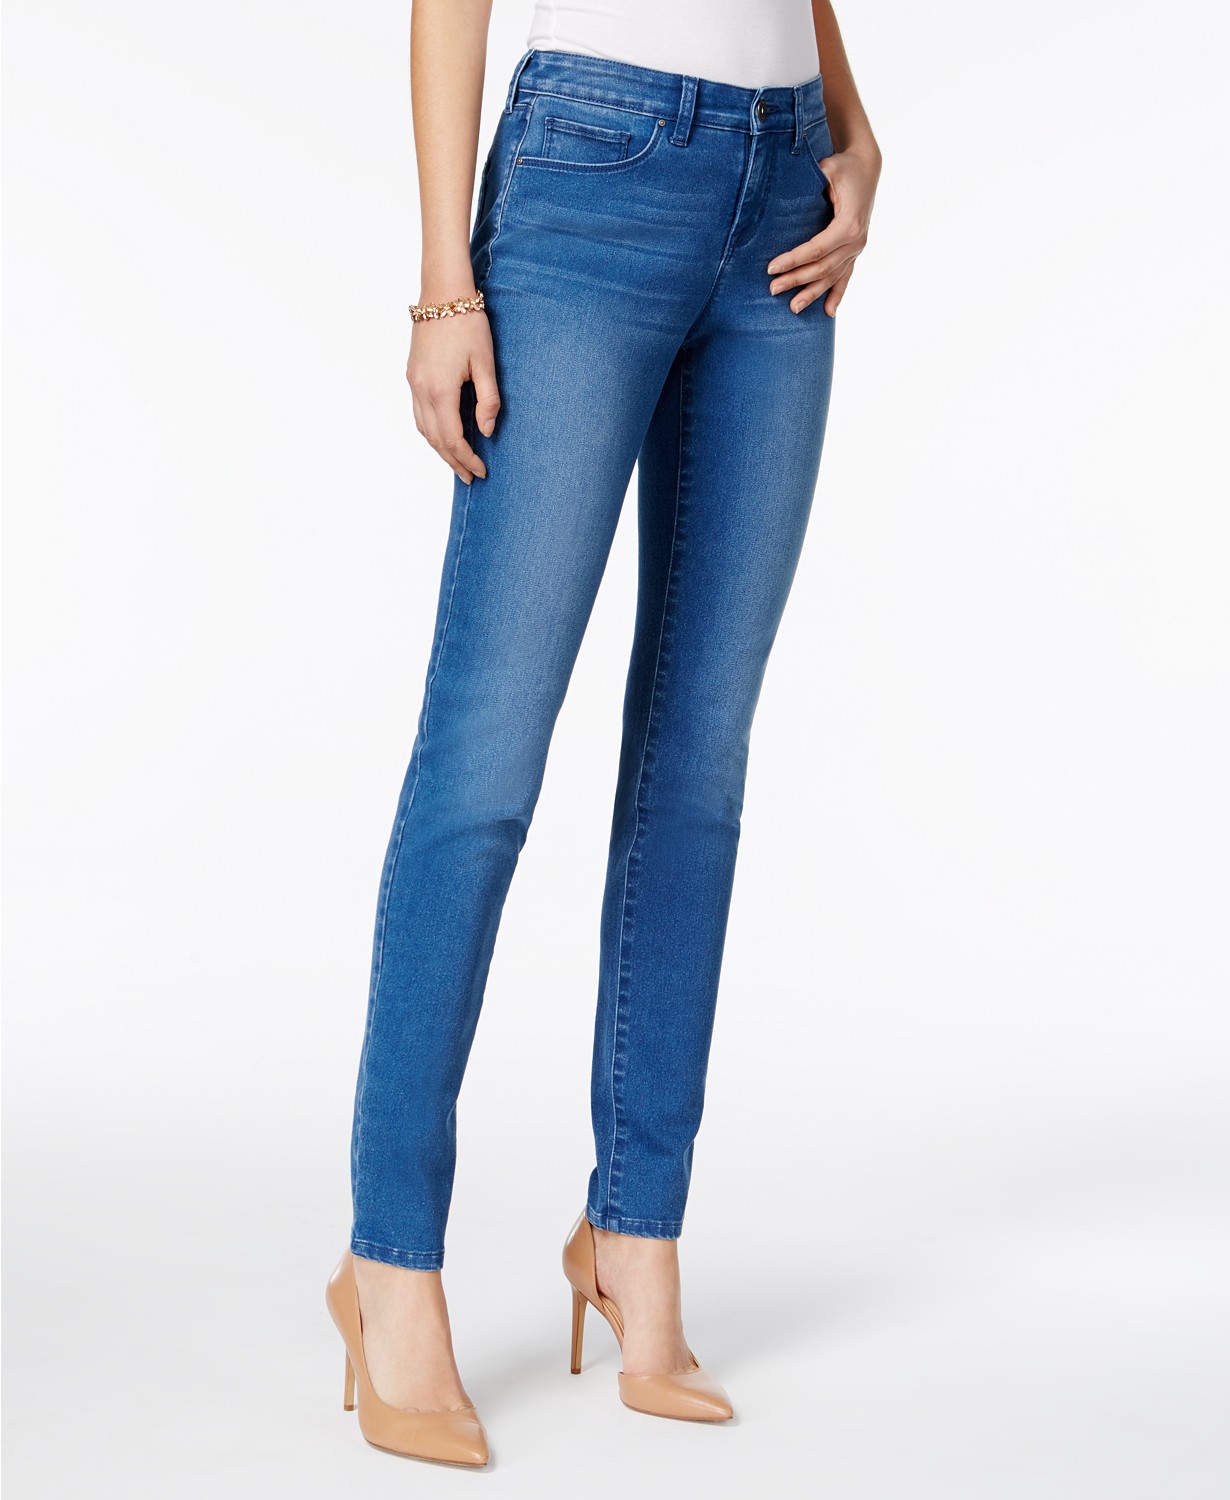 style & co curvy skinny jeans